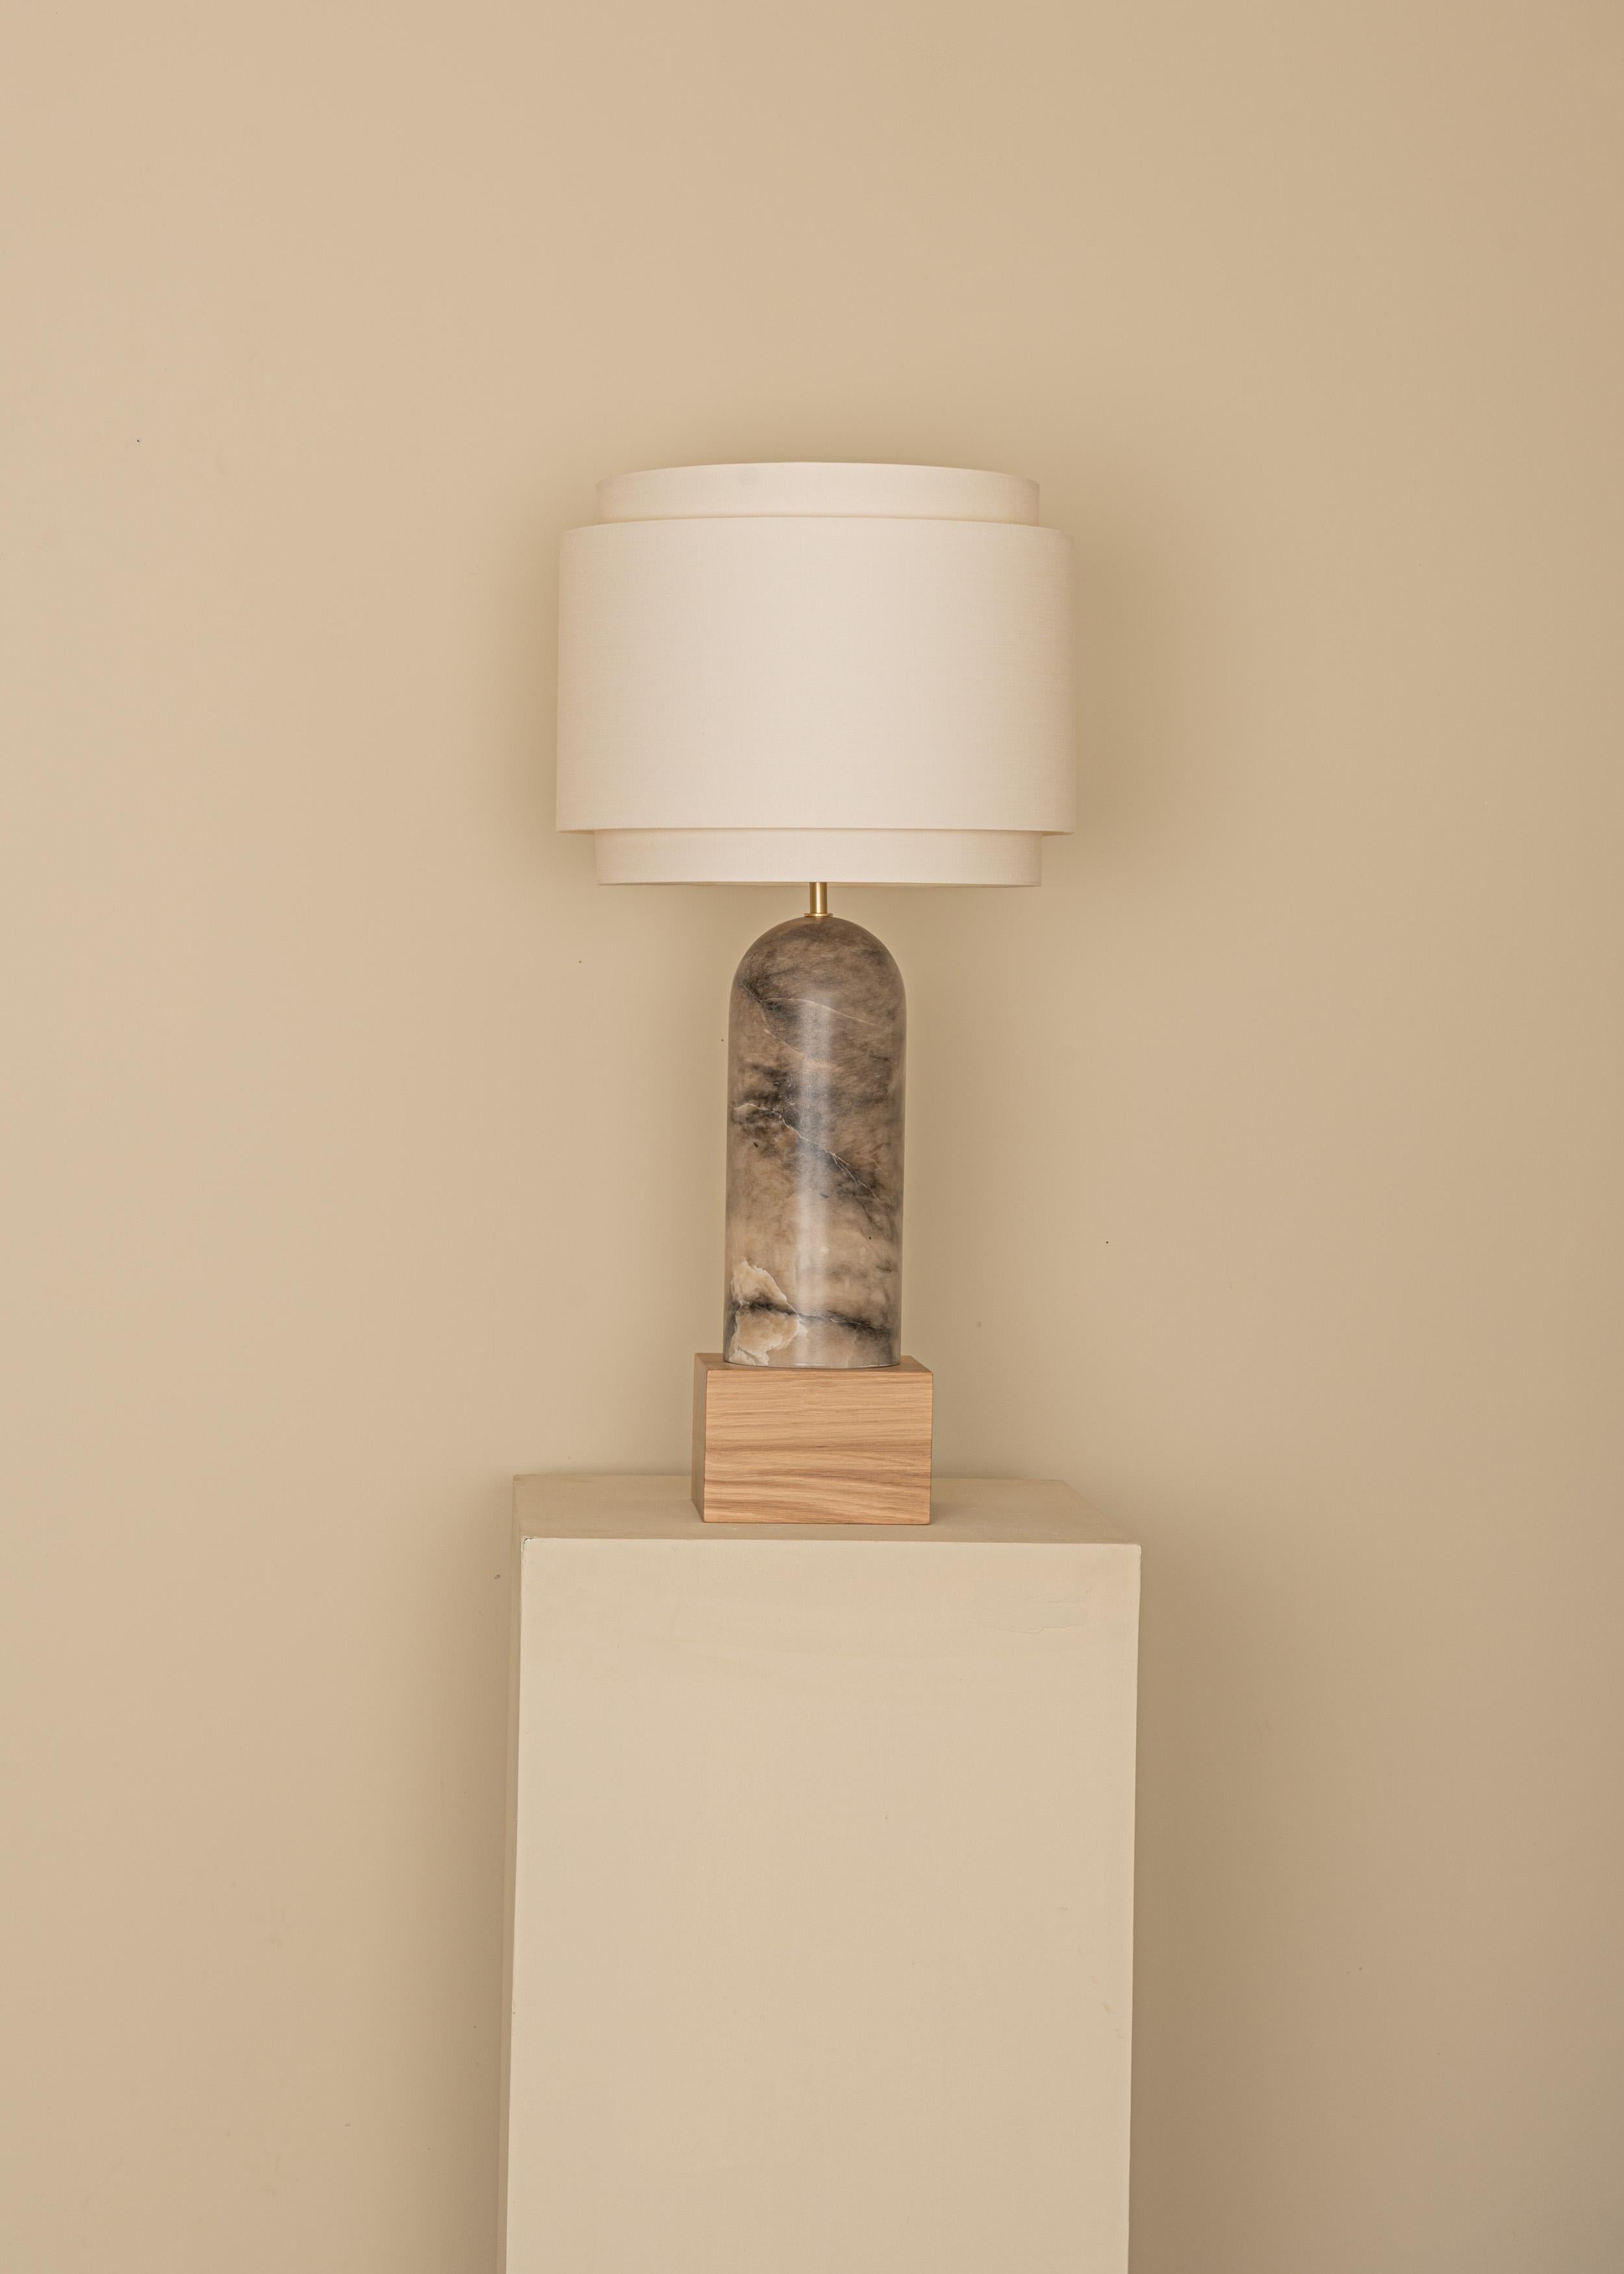 Tobacco Alabaster And Oak Base Pura Kelo Double Table Lamp by Simone & Marcel
Dimensions: D 35 x W 35 x H 69 cm.
Materials: Brass, cotton, oak and tobacco alabaster.

Also available in different marble, wood and alabaster options and finishes.